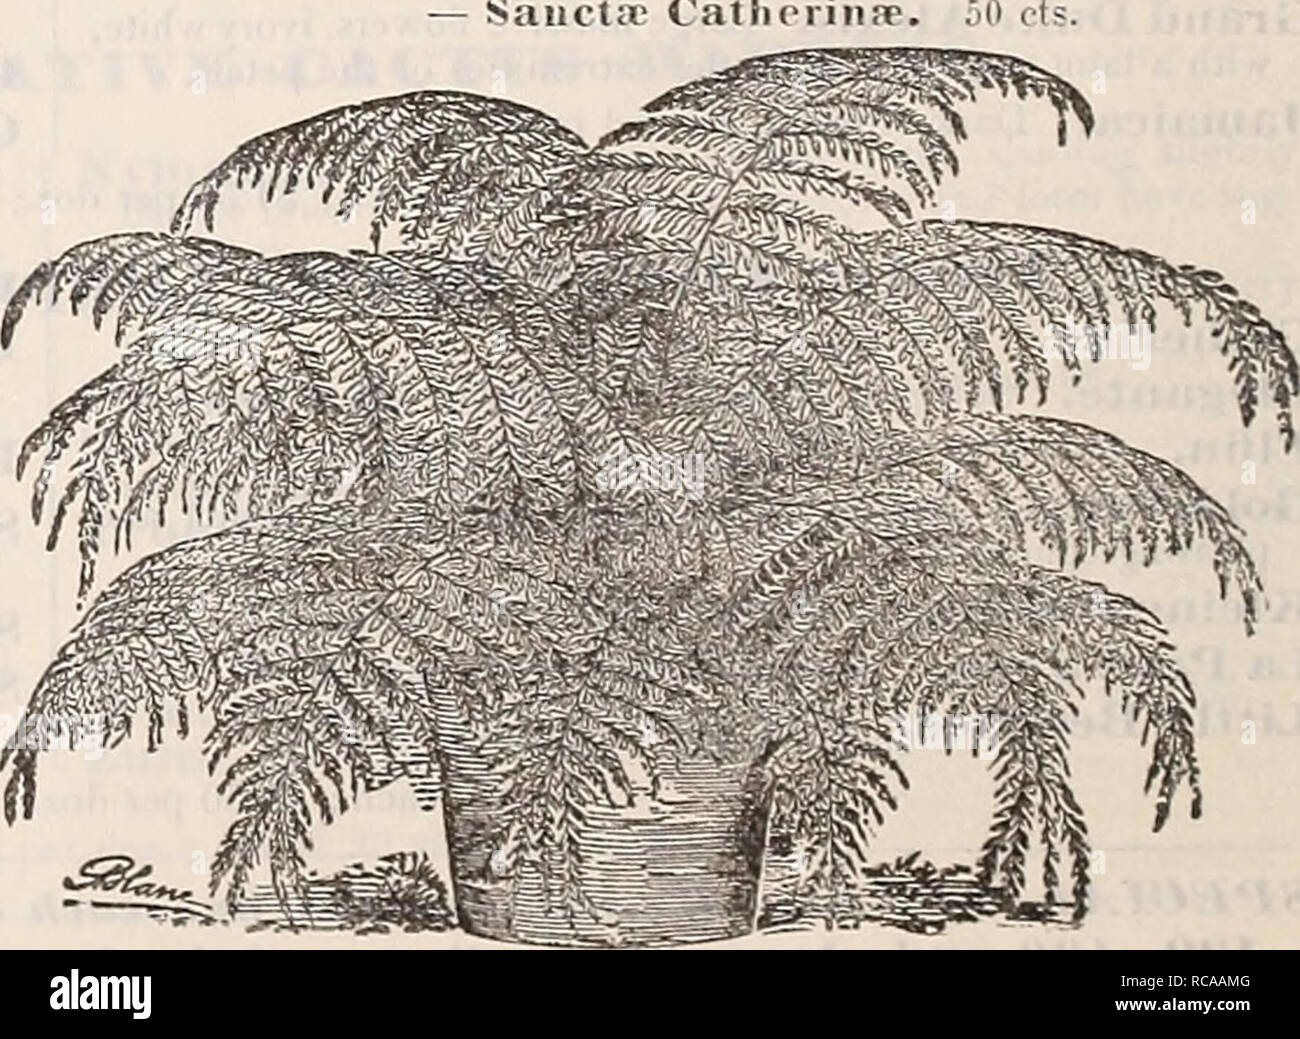 . Dreer's 1901 garden calendar. Seeds Catalogs; Nursery stock Catalogs; Gardening Equipment and supplies Catalogs; Flowers Seeds Catalogs; Vegetables Seeds Catalogs; Fruit Seeds Catalogs. â â ^r^s^^^^^sfc^ Davallia Bullata foot ot' next page.) Boston Sword Fern. â Fijieiisis Major. 25 cts. â Elegaiis. Sl.OO. â Fijieiisis Pluiiiosa. 25 cts. â Oniata. 75 cts. â Peiilaphylla. 25 cfs. Â«â â âStricta. One of the finest Ferns in cultivation, whether for growing as a decorative plant in the room or planting out. 15 cts. and 25 cts. â Dictyogranima Japoiiica. 25 cts. â â Variegata. 25 cts. Didy!nocbla Stock Photo